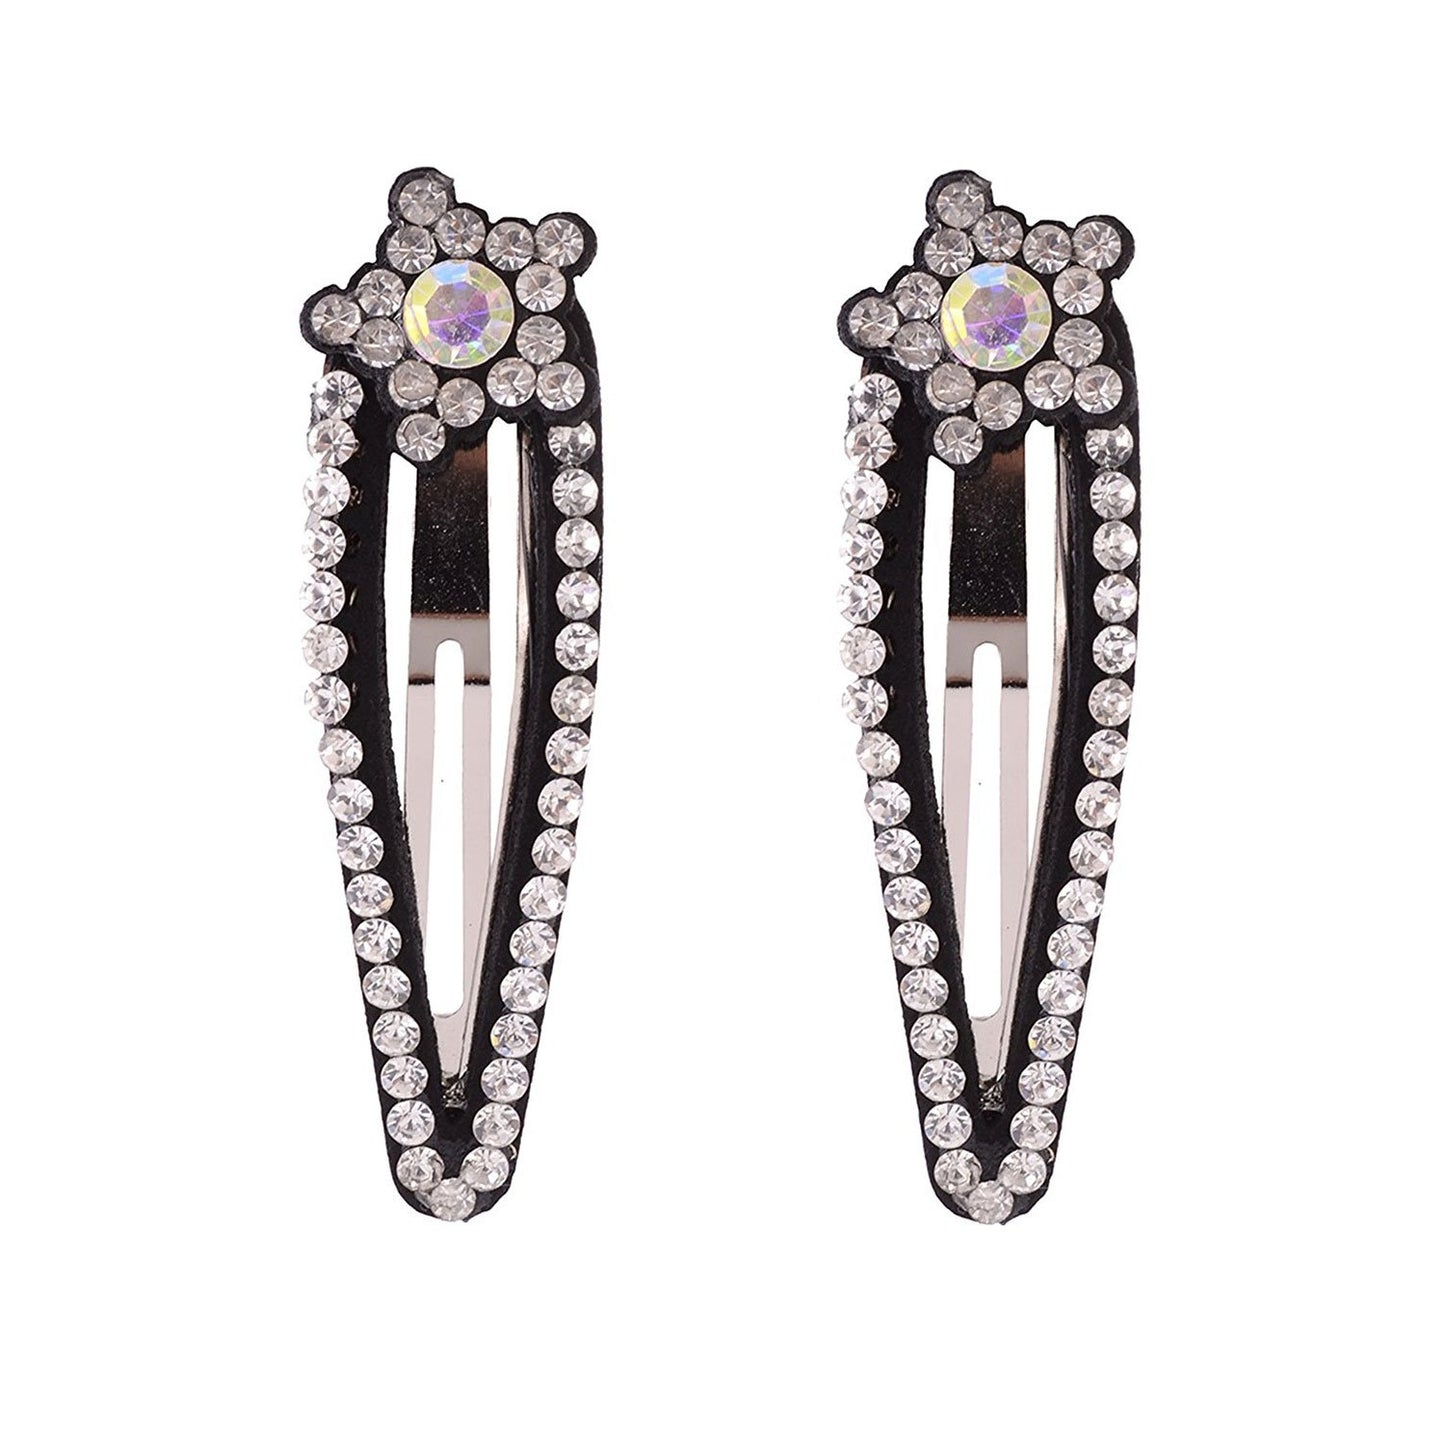 Anokhi Ada Fancy Floral Stone studded Tic Tac Hair Clip for Girls and Women - (BF-08)